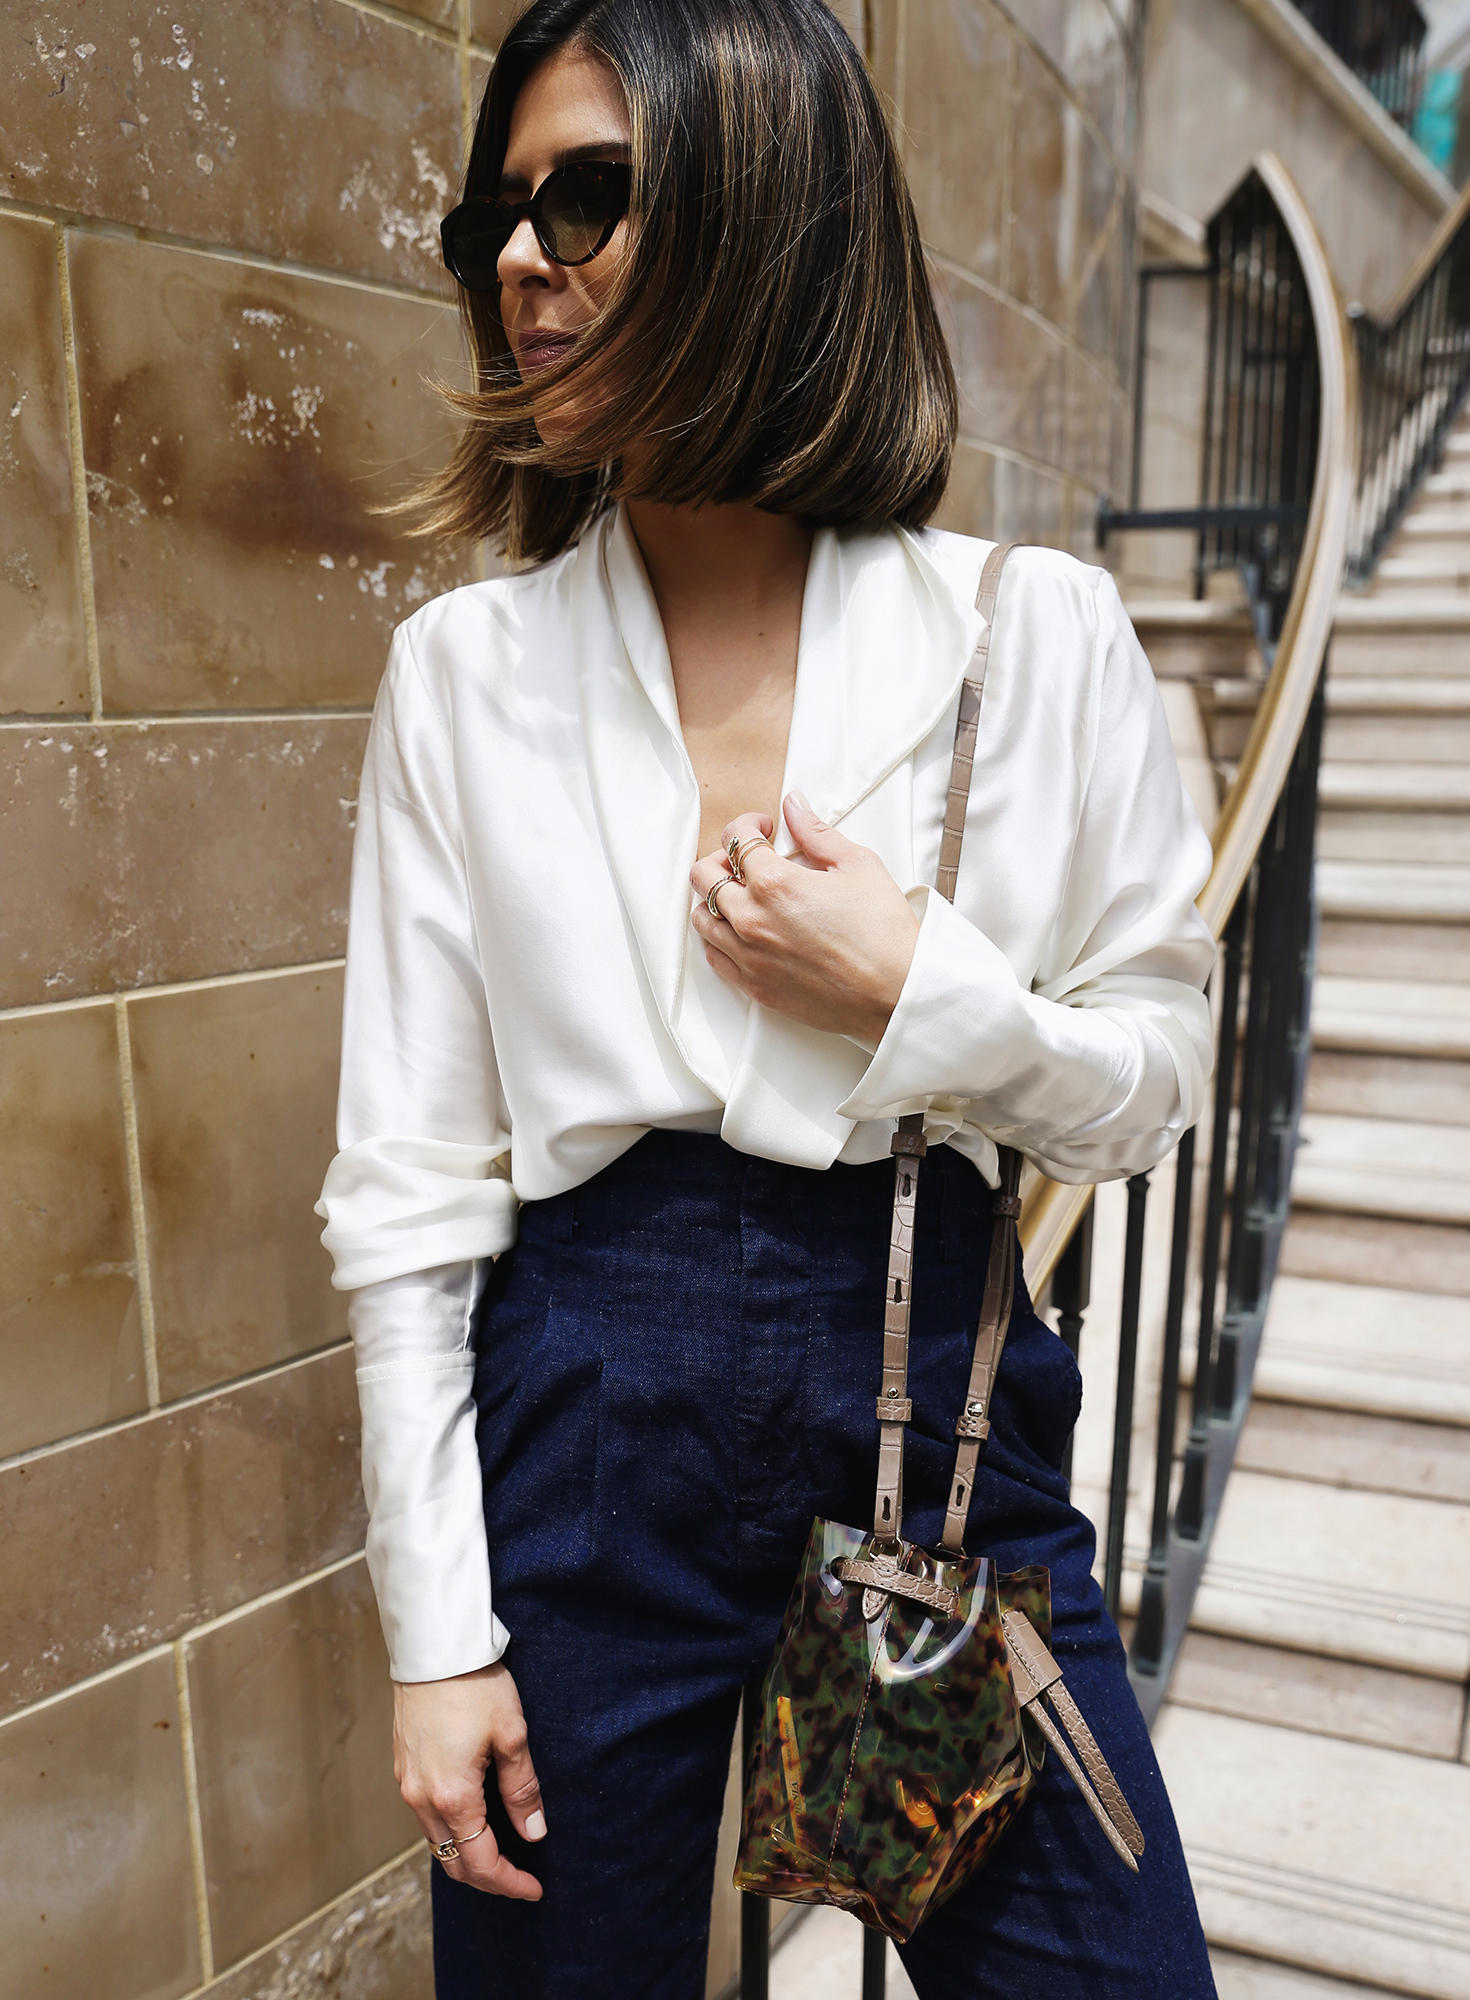 The Most Stylish White Tops You Need for Summer - The Girl from Panama